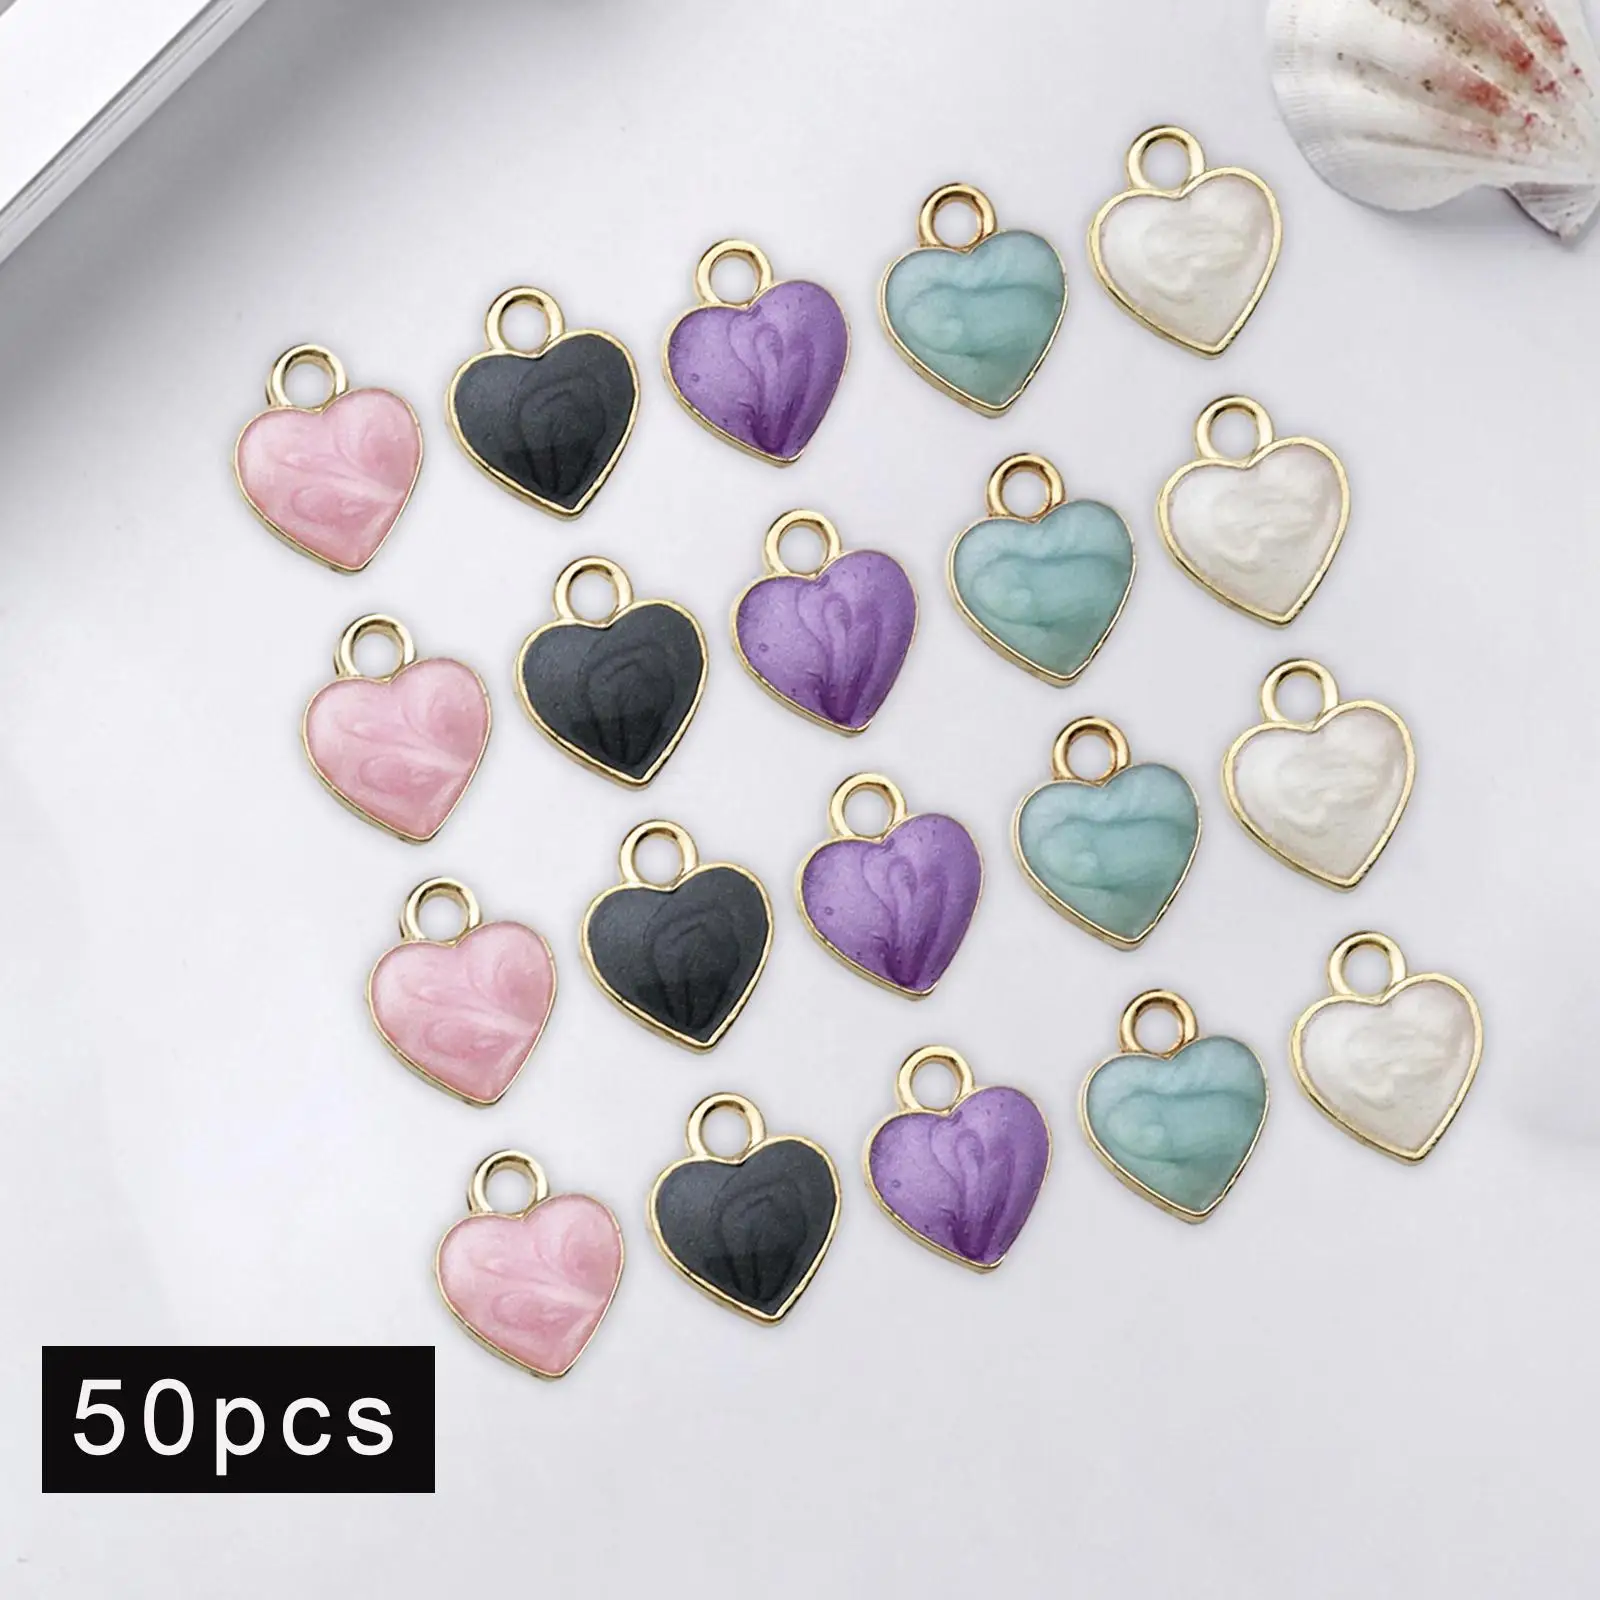 50 Pieces Love Heart Charms Smooth Surface Ornaments Alloy Valentine`s Gifts for Kids Wife Couples Girlfriend Family Members